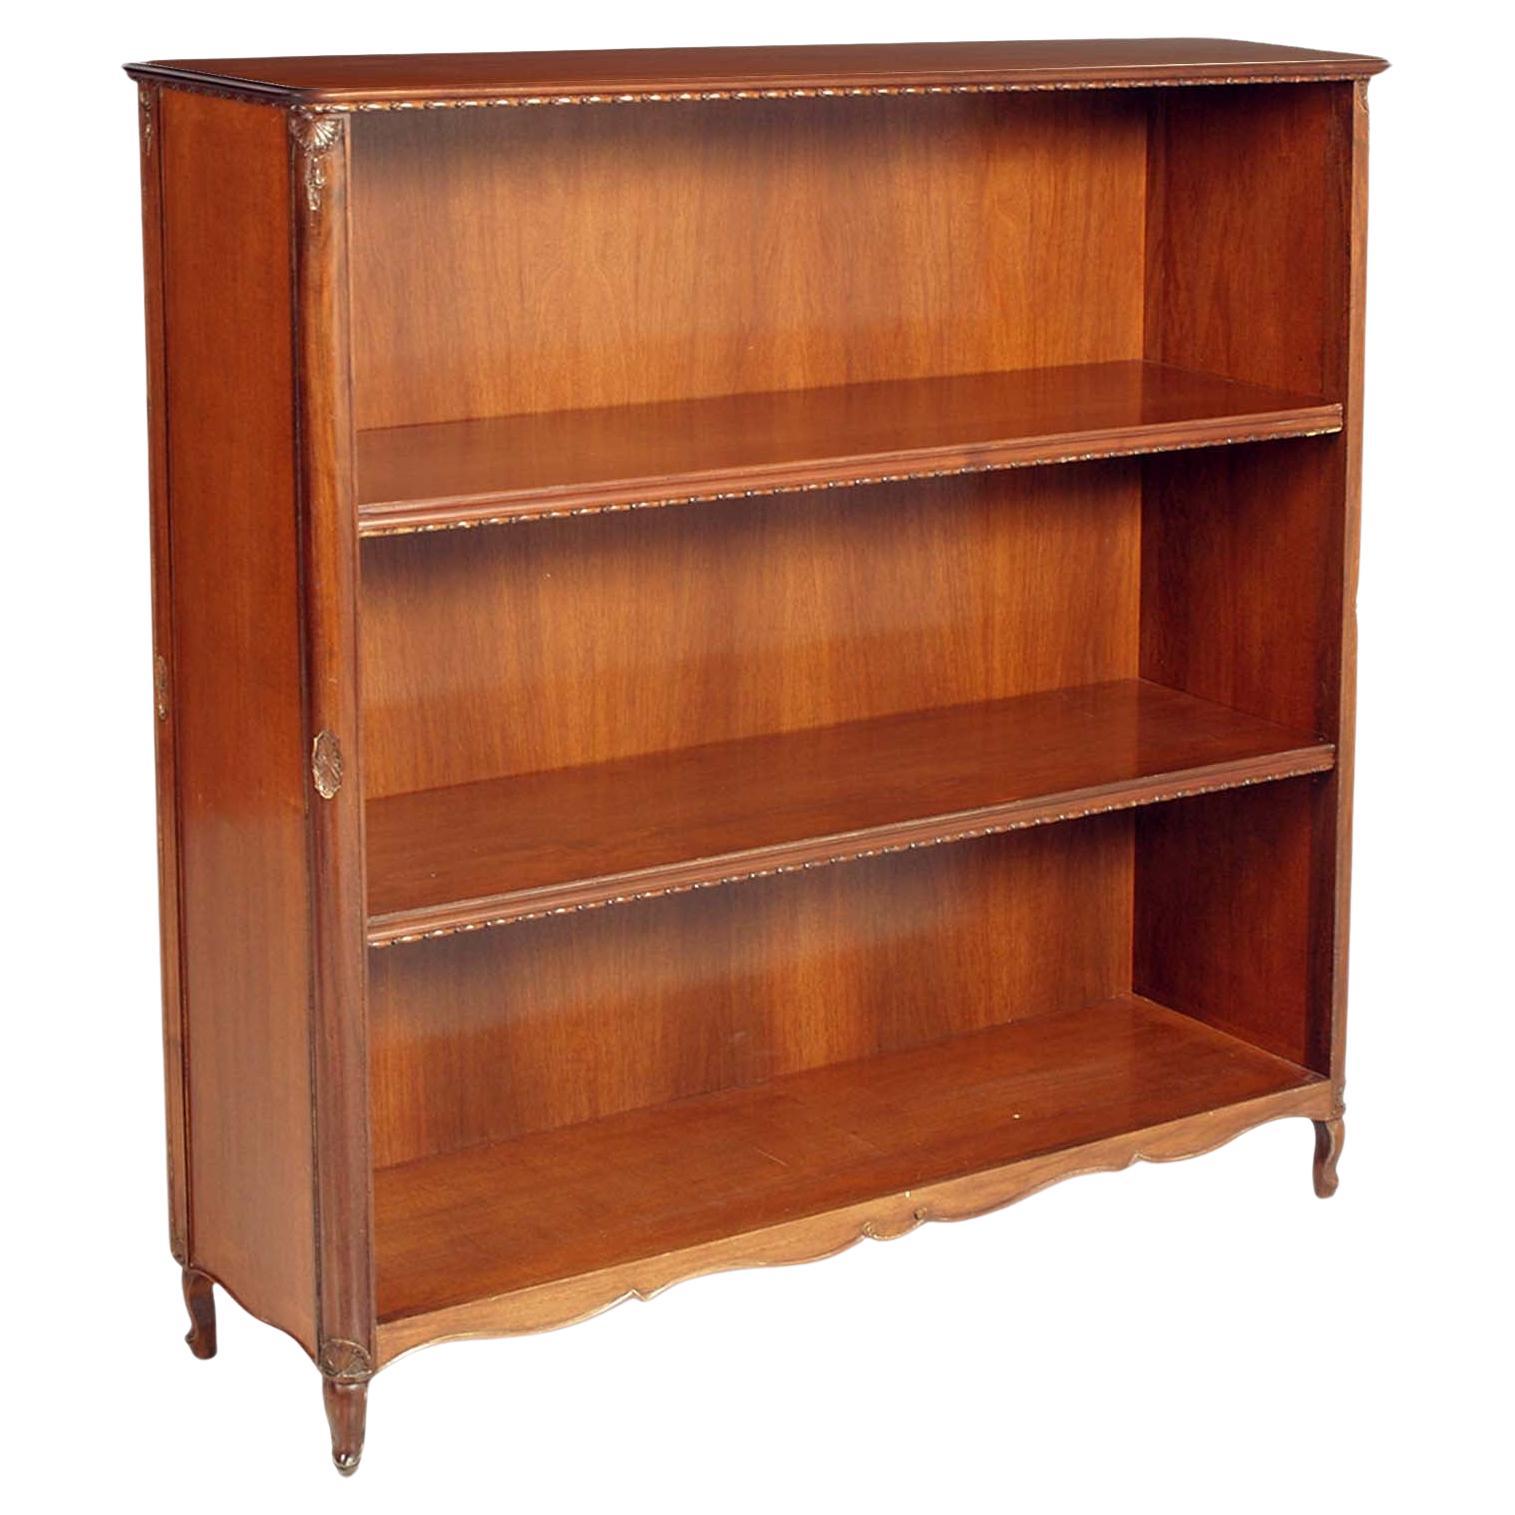 1930s Open Bookcase in Neoclassical Carved Mahogany, by Bassano's Ebanistery For Sale